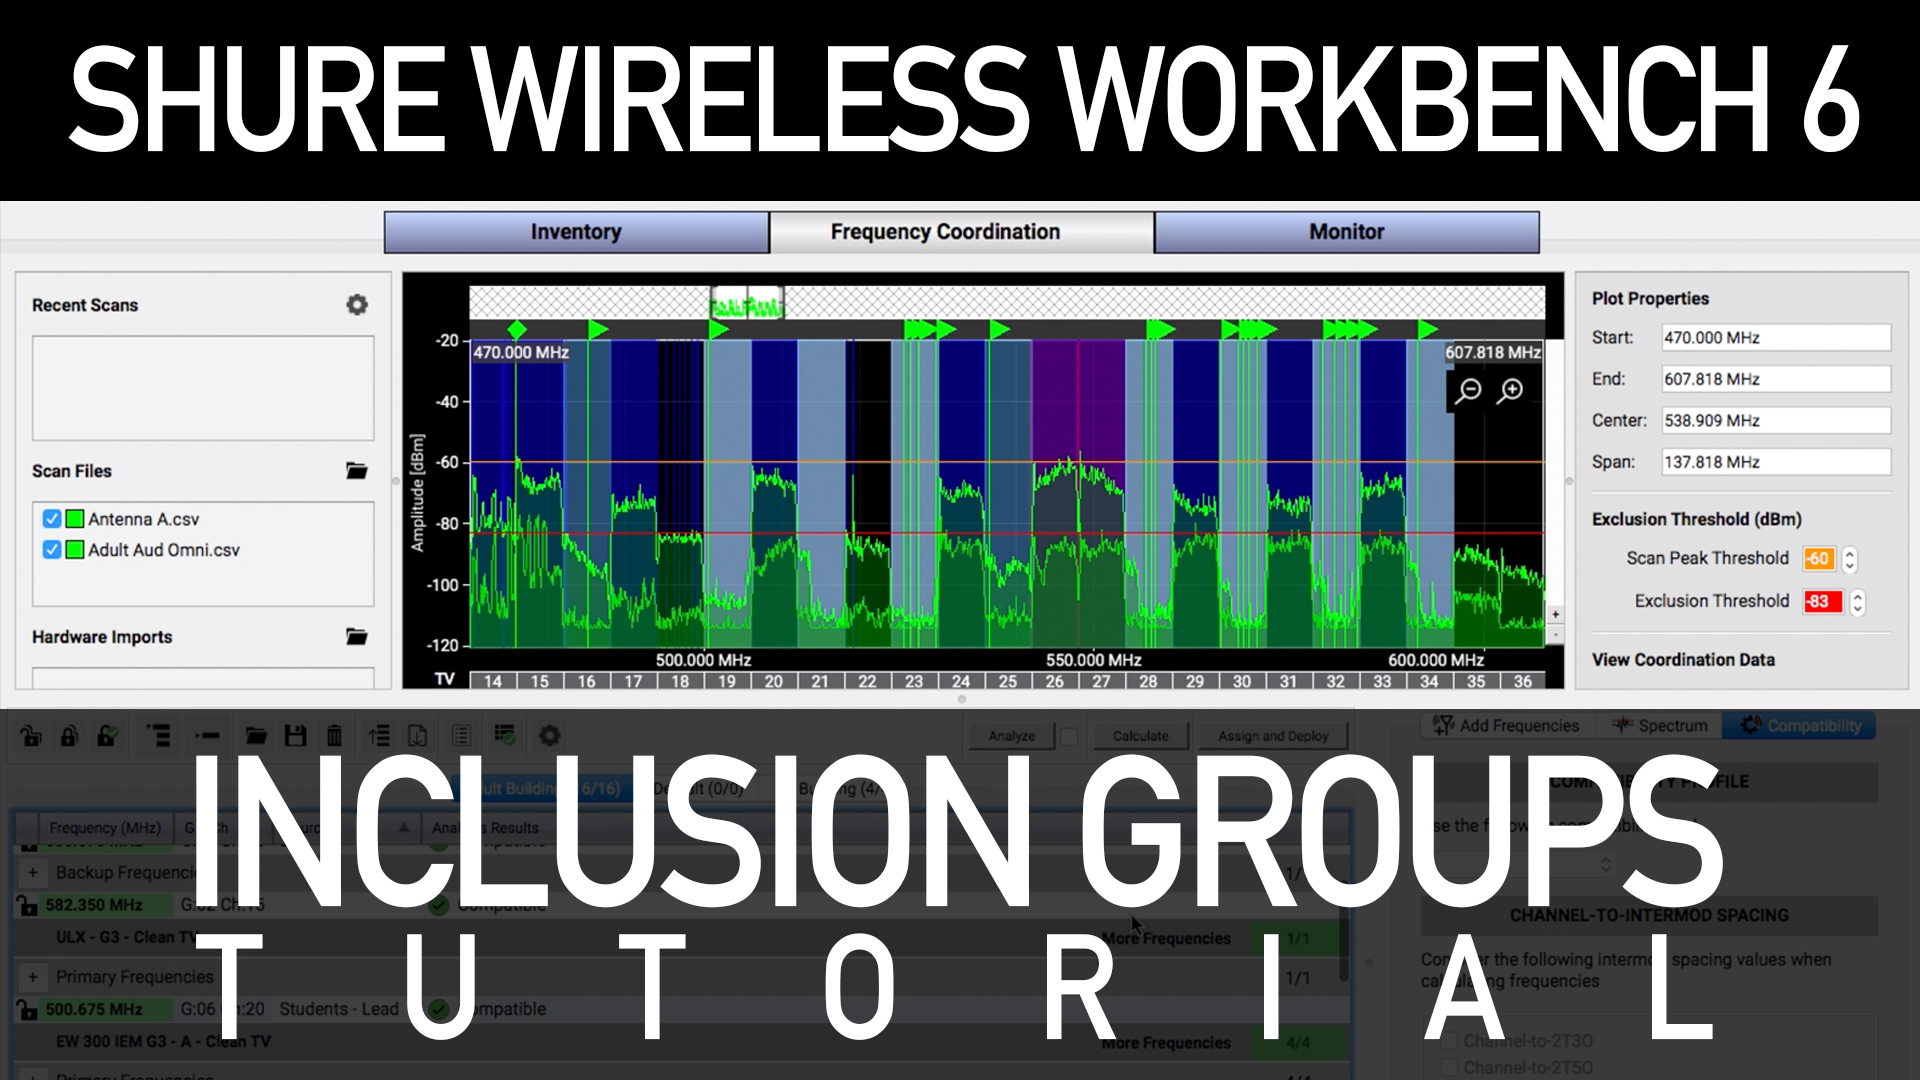 Shure Wireless Workbench 6 Tutorial - Inclusion Groups